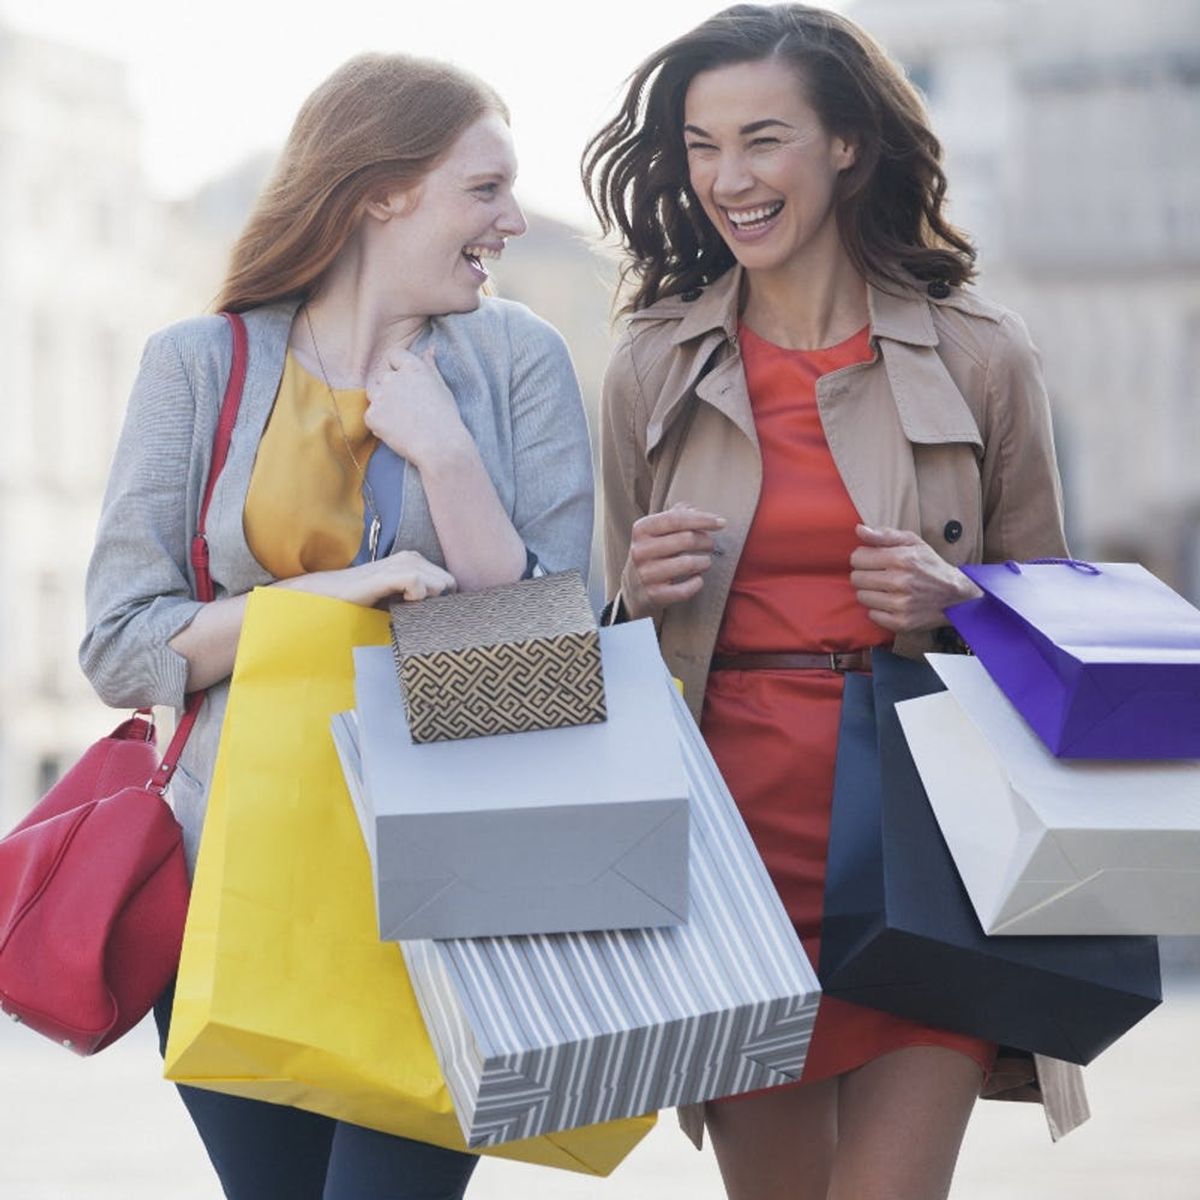 Your Personality Could Be to Blame for Your Luxury Shopping Habits